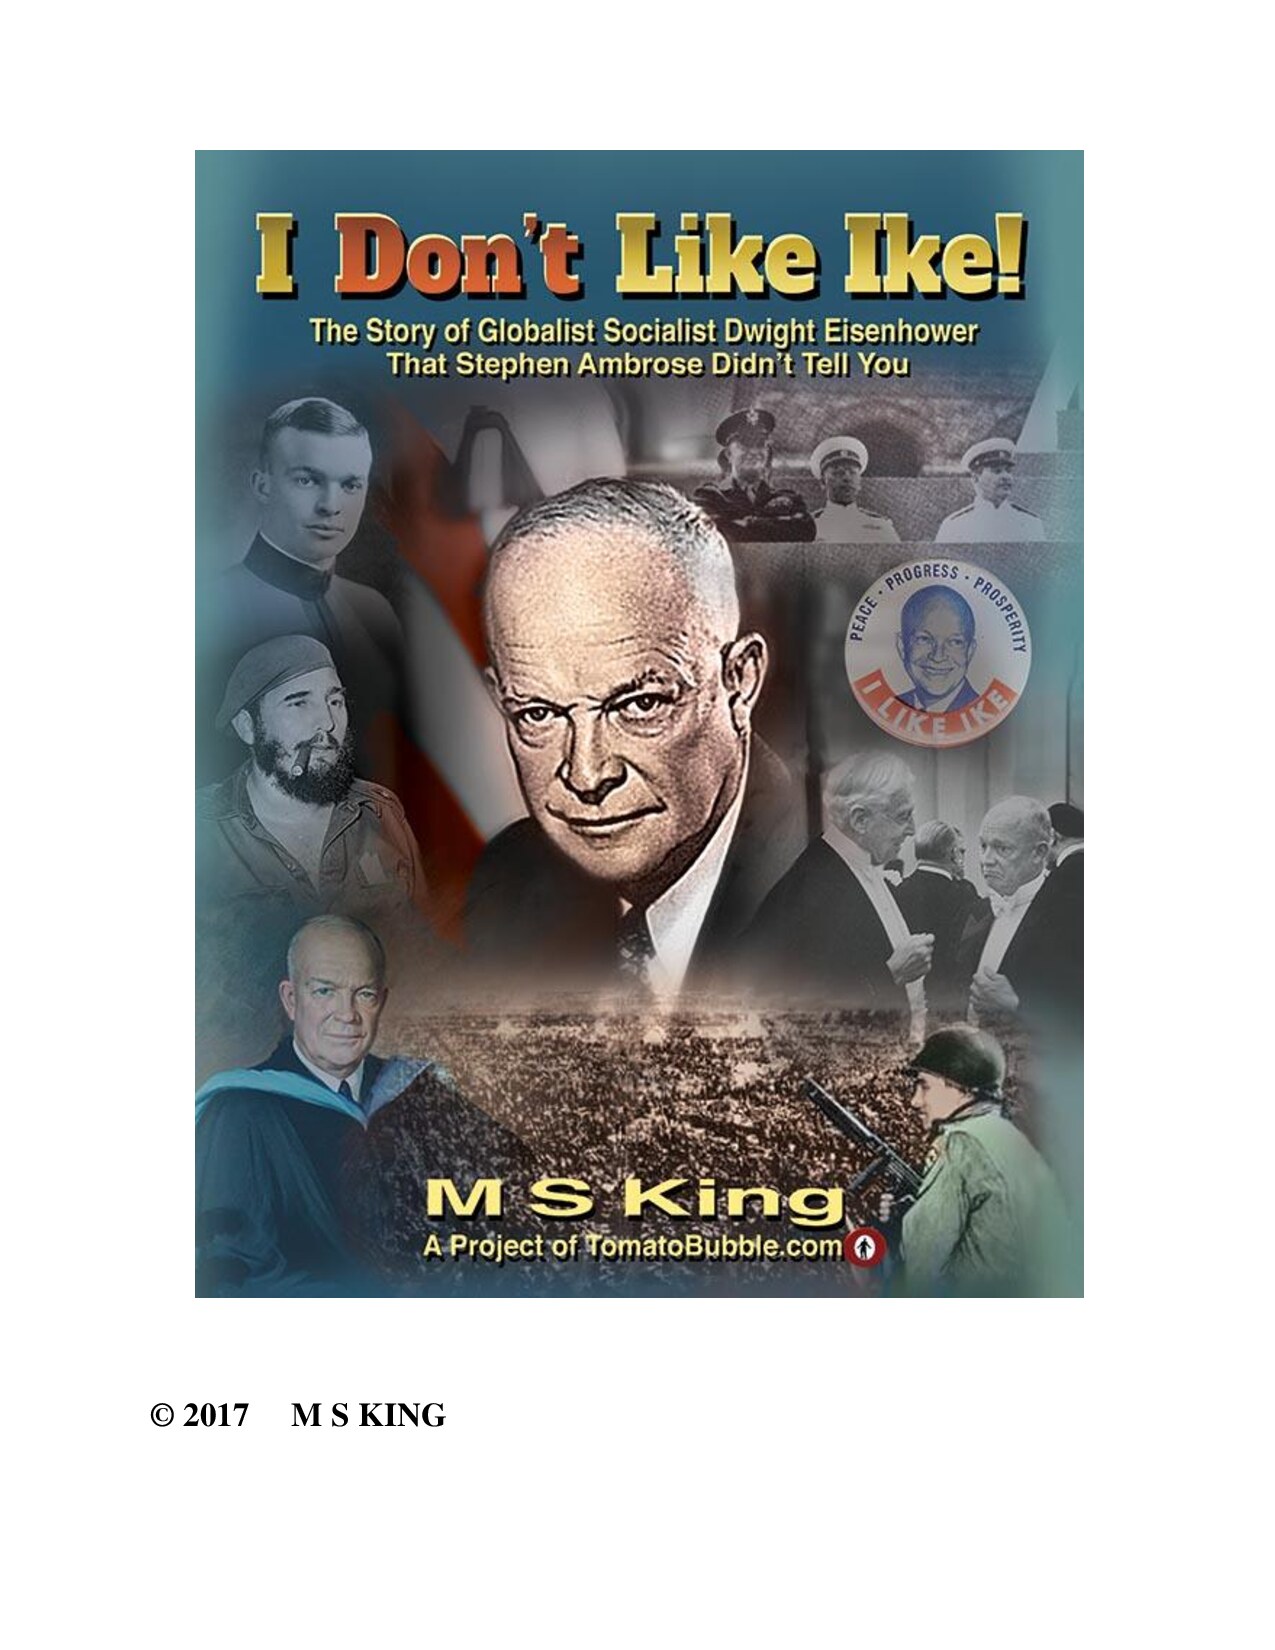 King, Mike S.; I Don't Like Ike!; The Story of Globalist Socialist Dwight Eisenhower that Stephen Ambrose Didn't Tell You